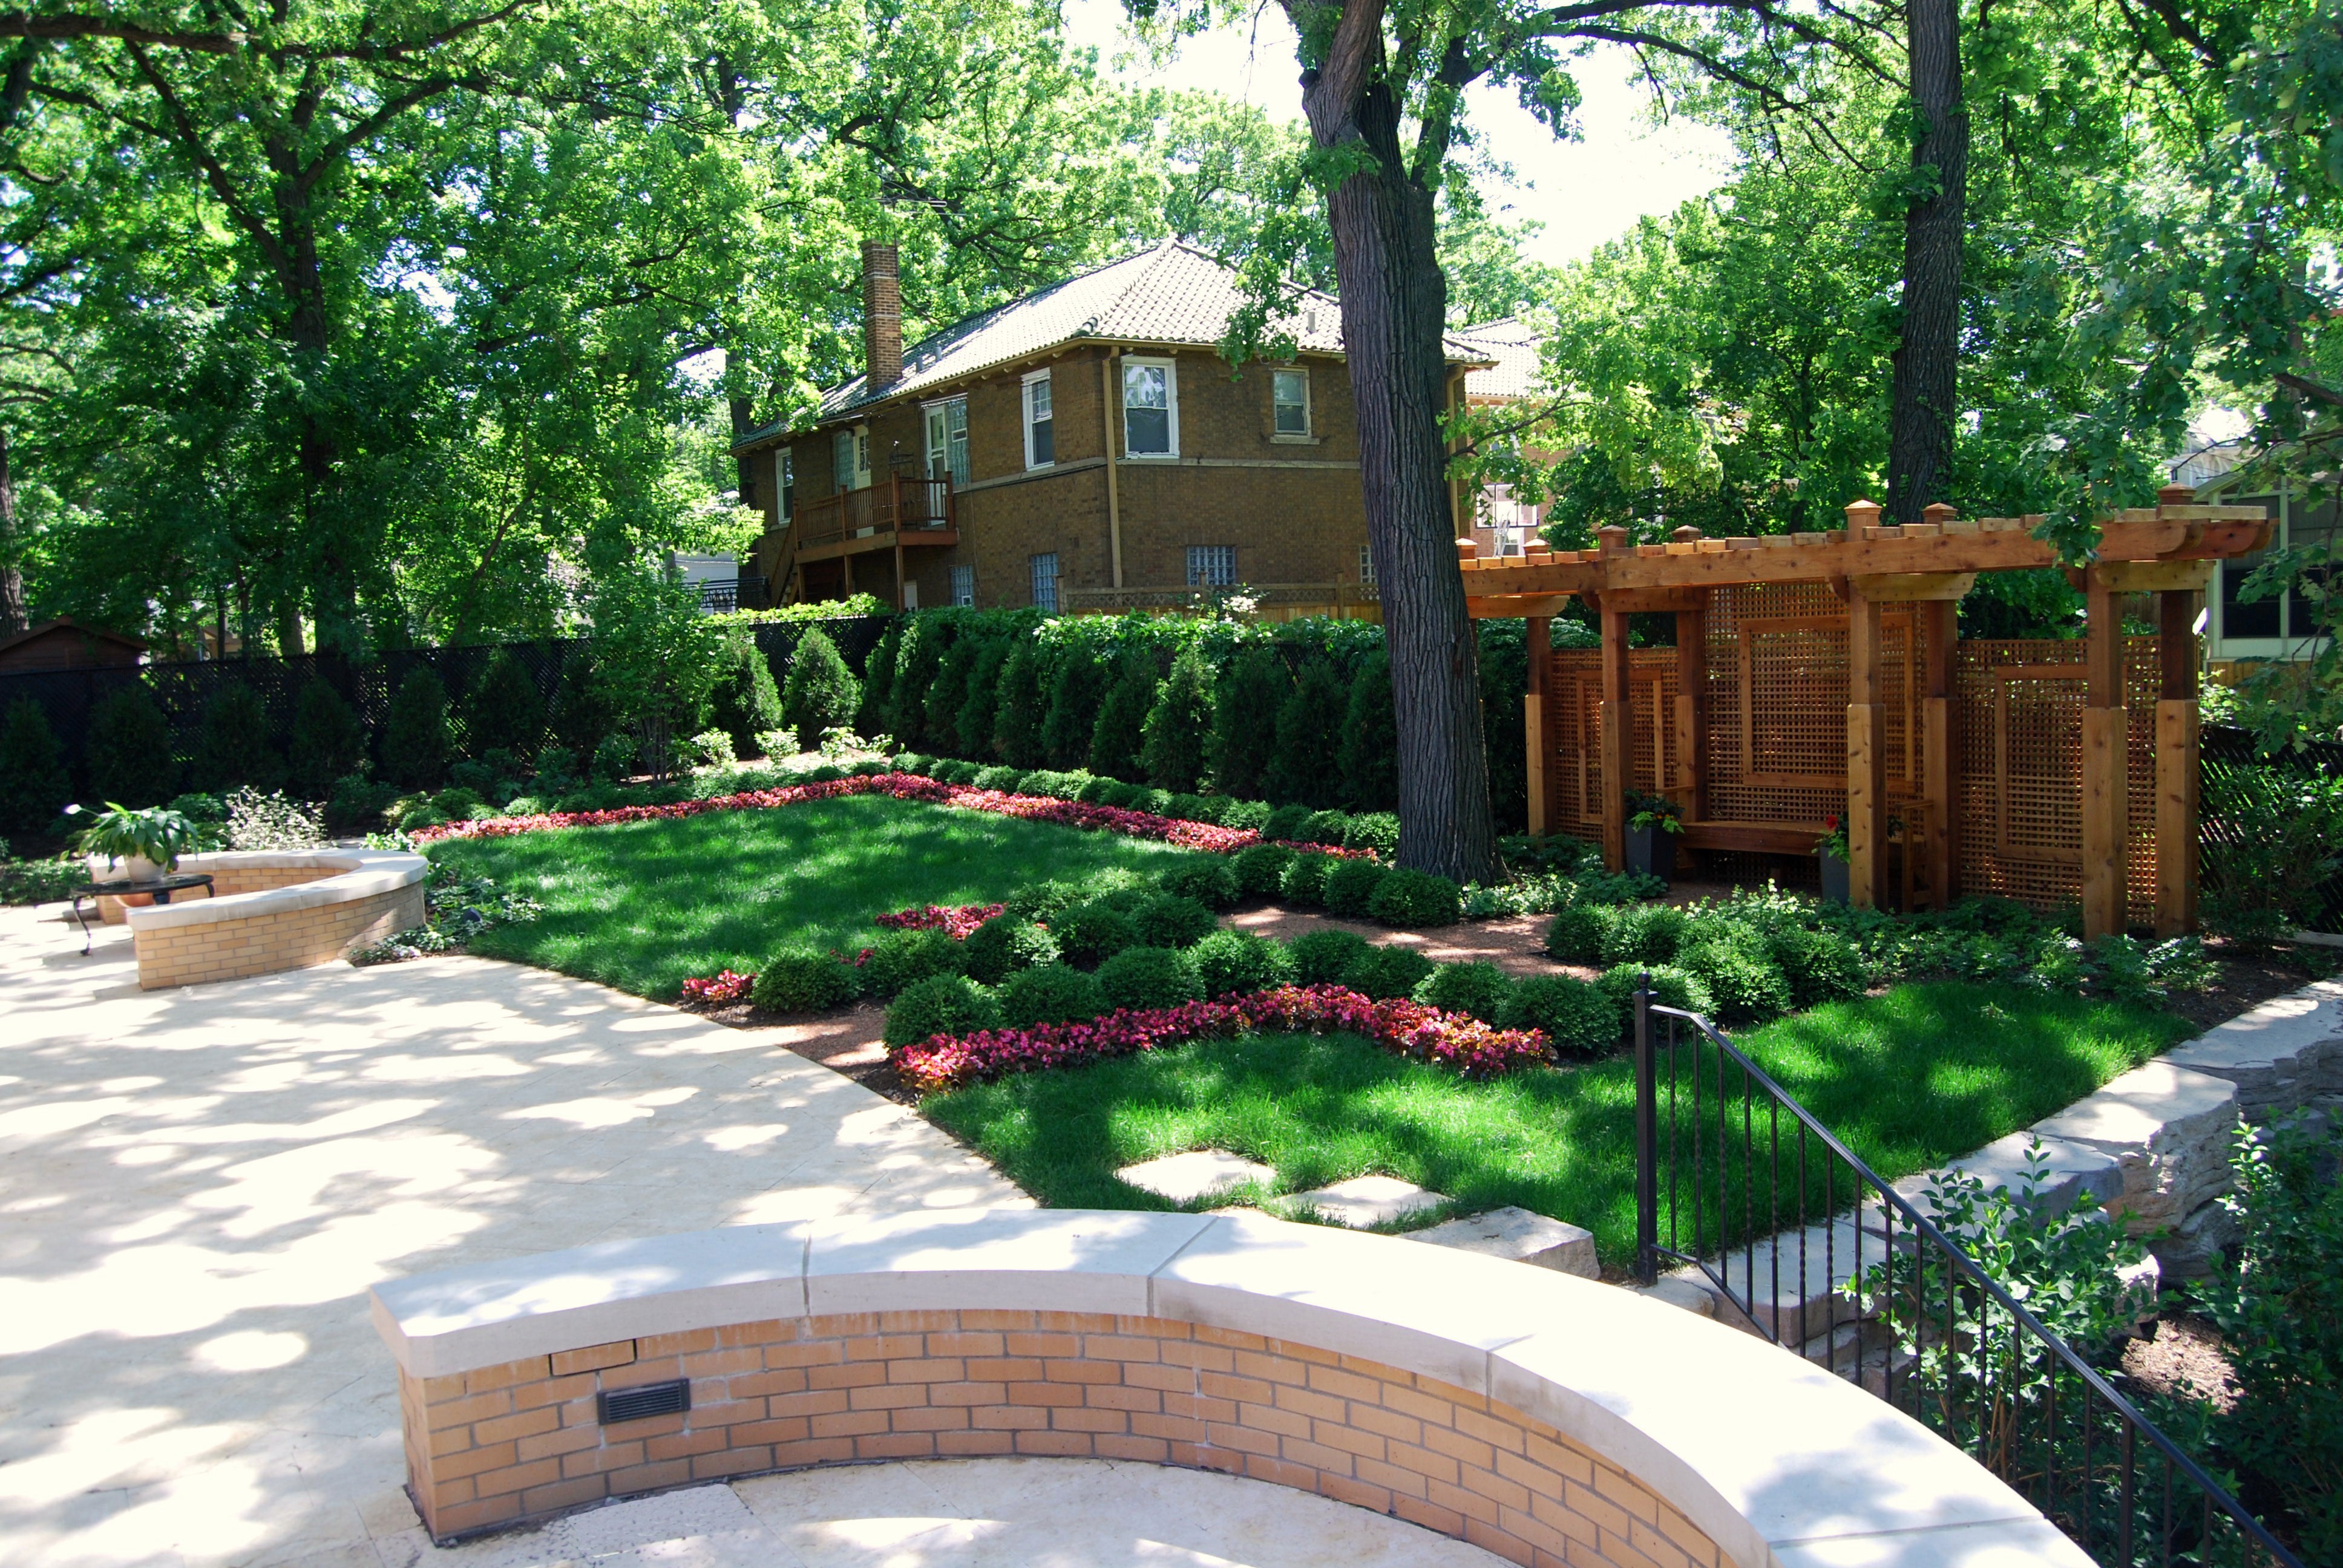 Naperville Landscaping Has Always Been Part Of Our Service Area, Now ...